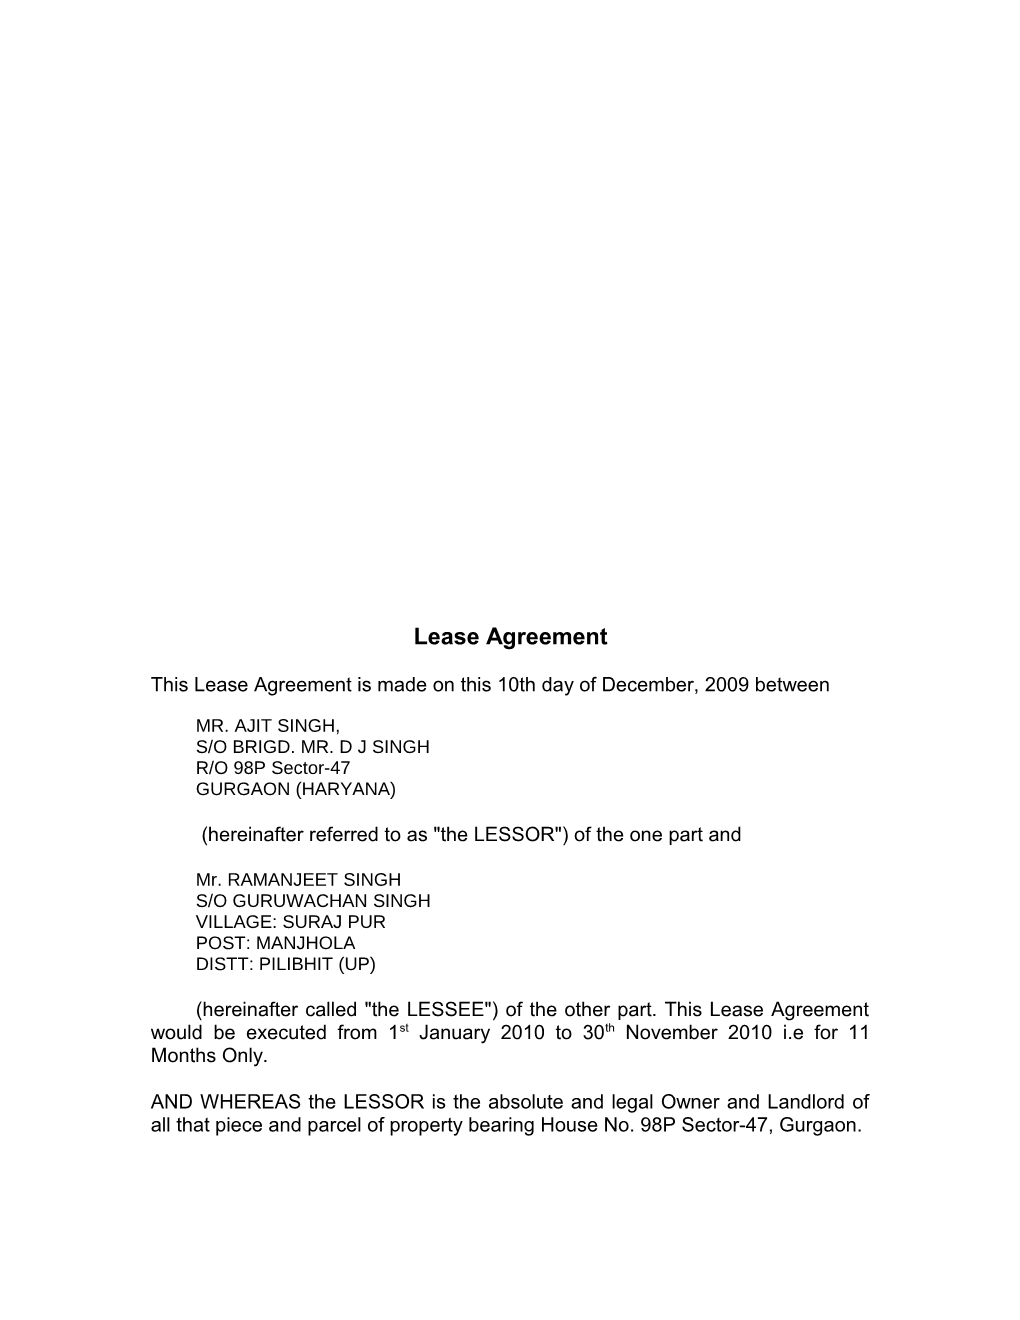 This Lease Agreement Is Made on This 10Th Day of December, 2009 Between